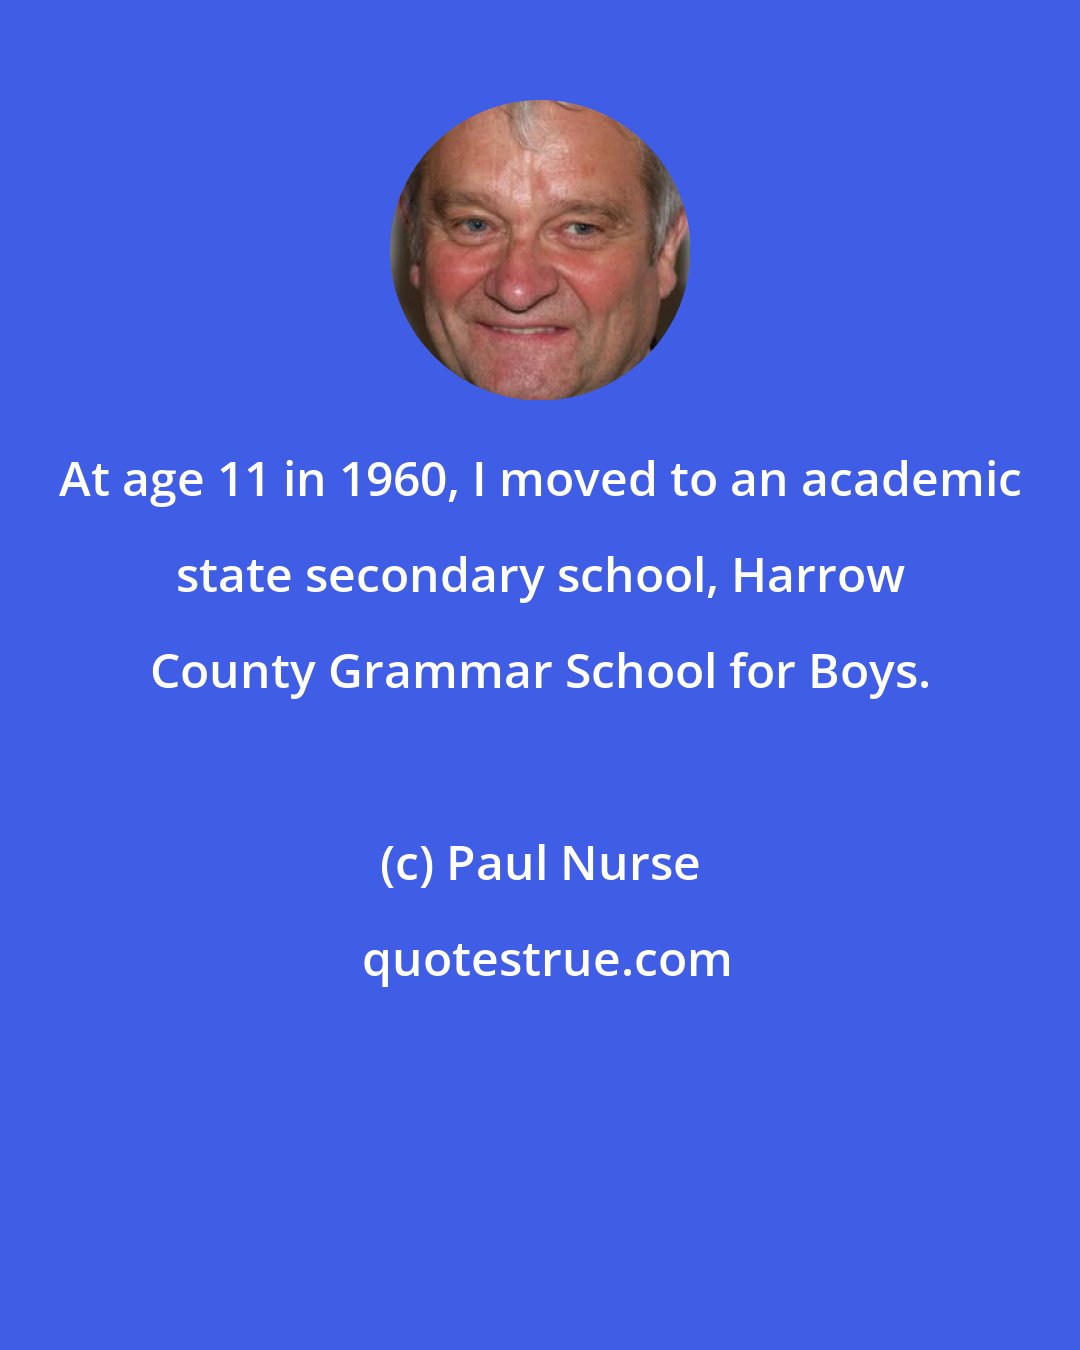 Paul Nurse: At age 11 in 1960, I moved to an academic state secondary school, Harrow County Grammar School for Boys.